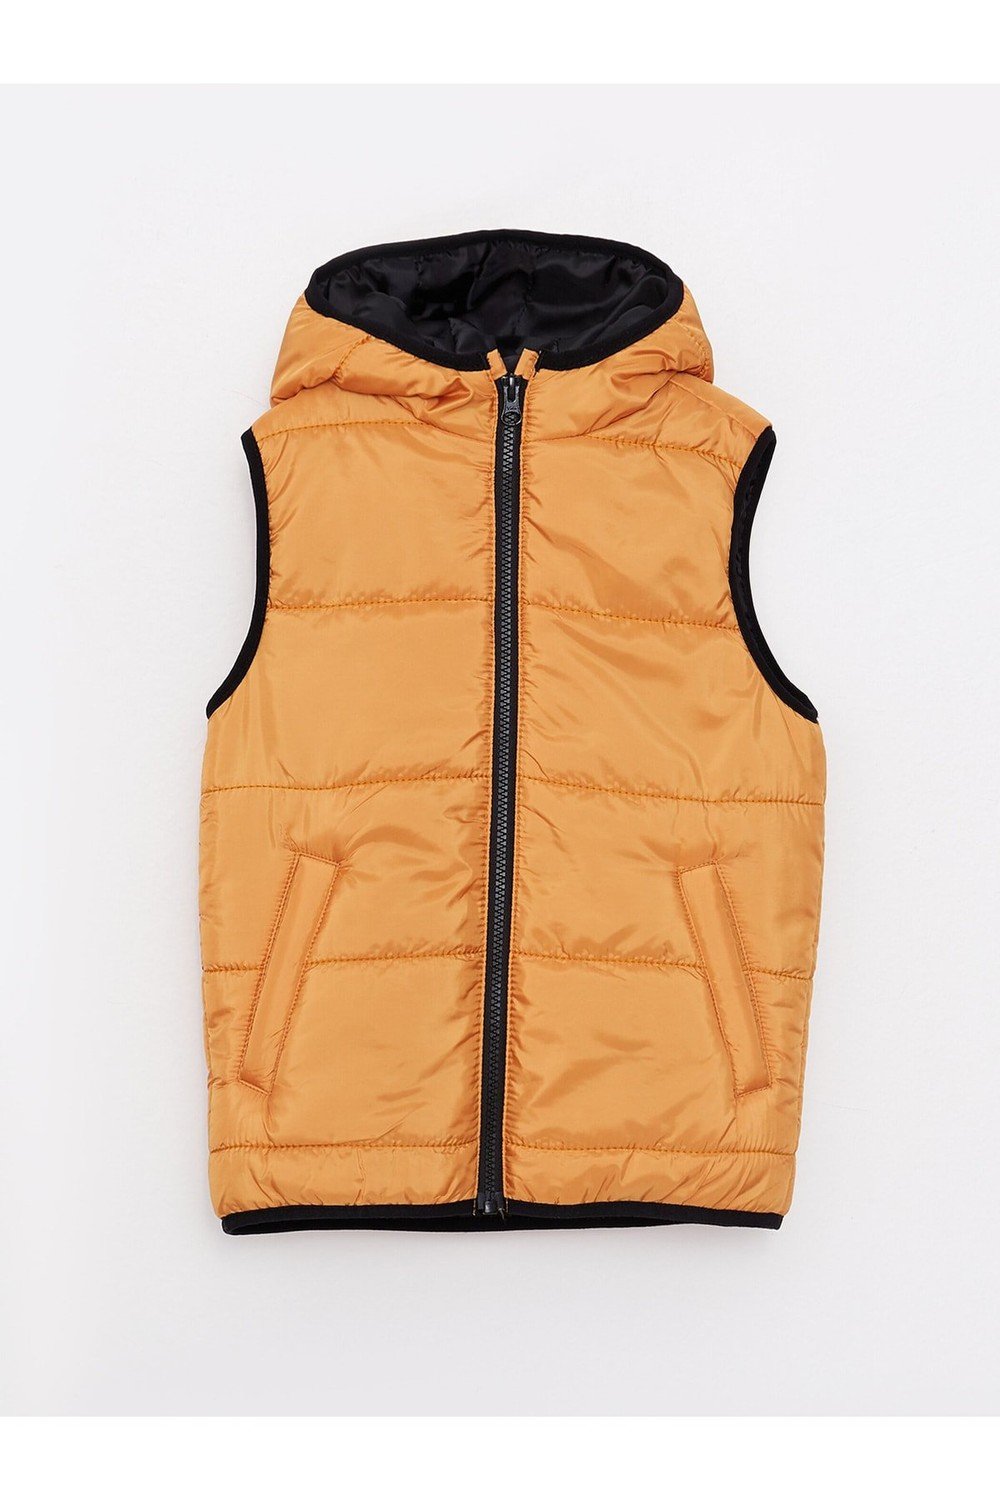 LC Waikiki Basic Boy's Inflatable Vest with a Hooded